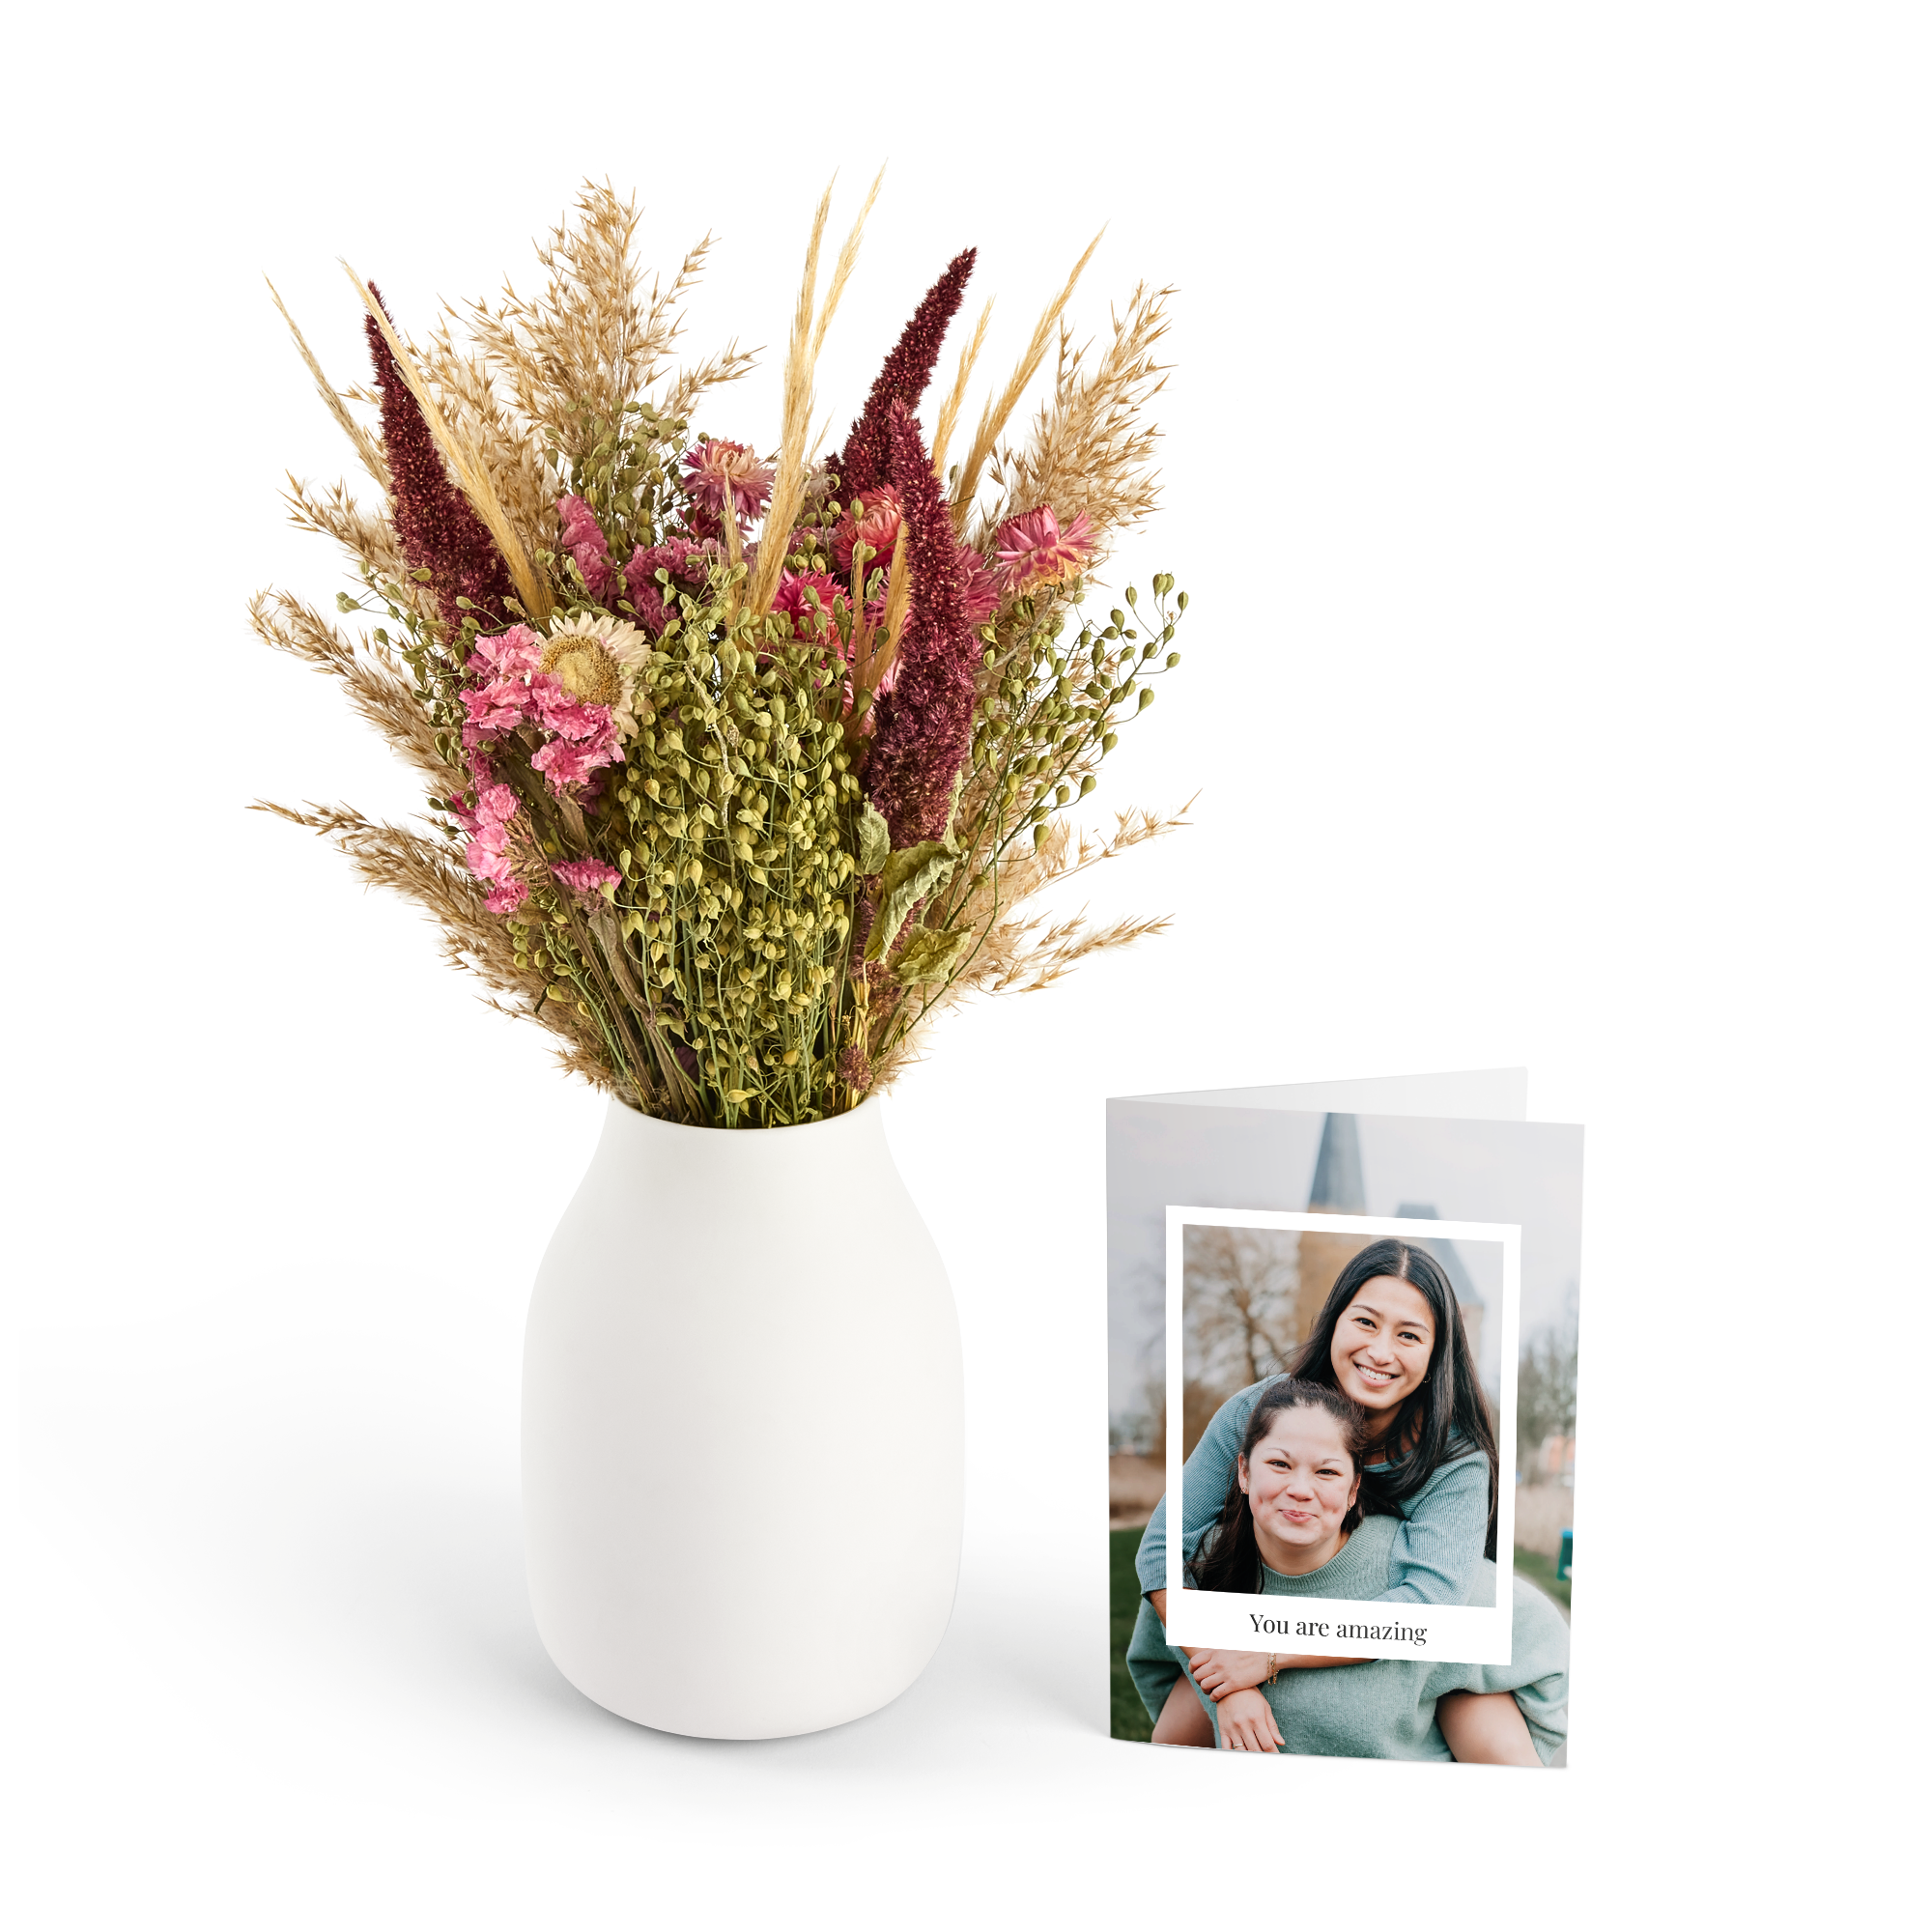 Dried flower bouquet with personalised card - Pink